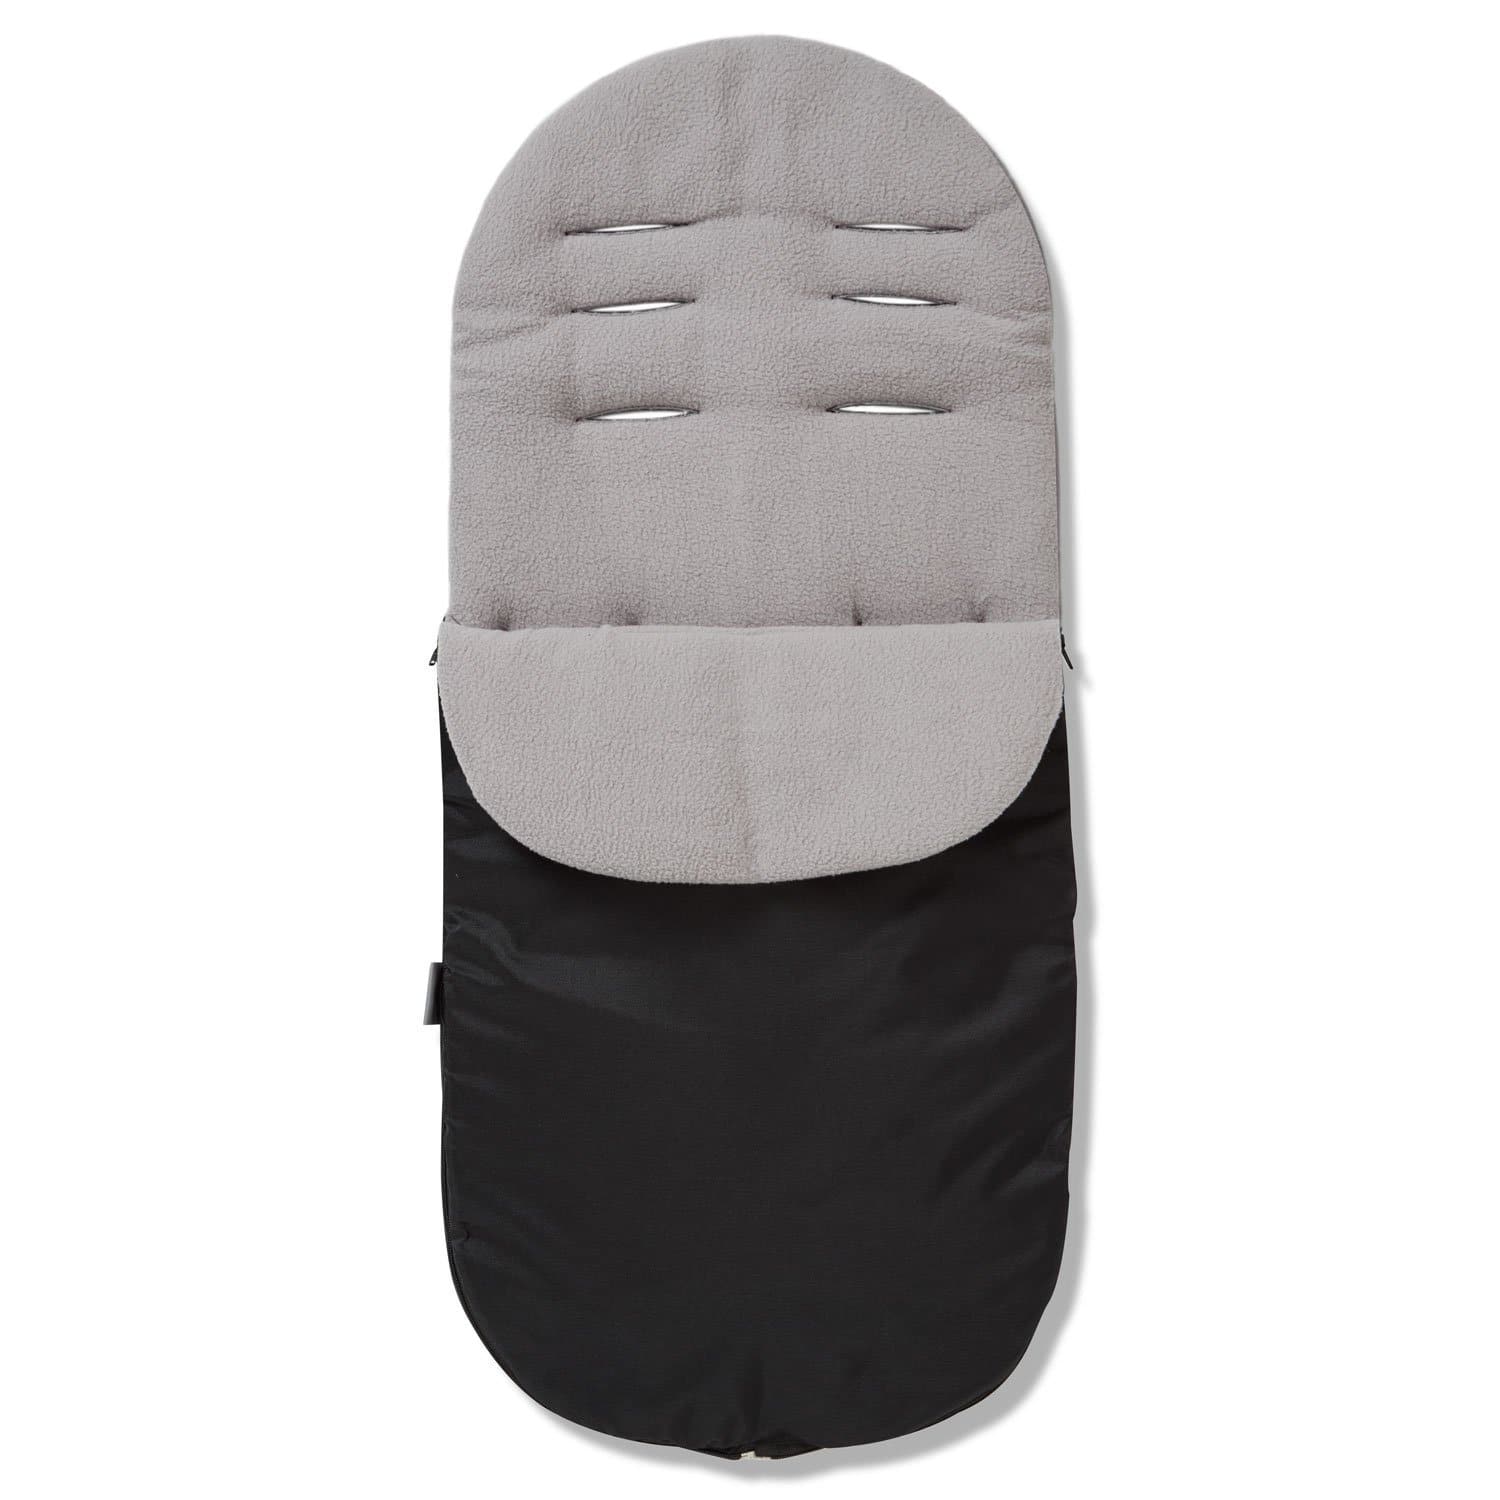 Footmuff / Cosy Toes Compatible with NeoNato - For Your Little One